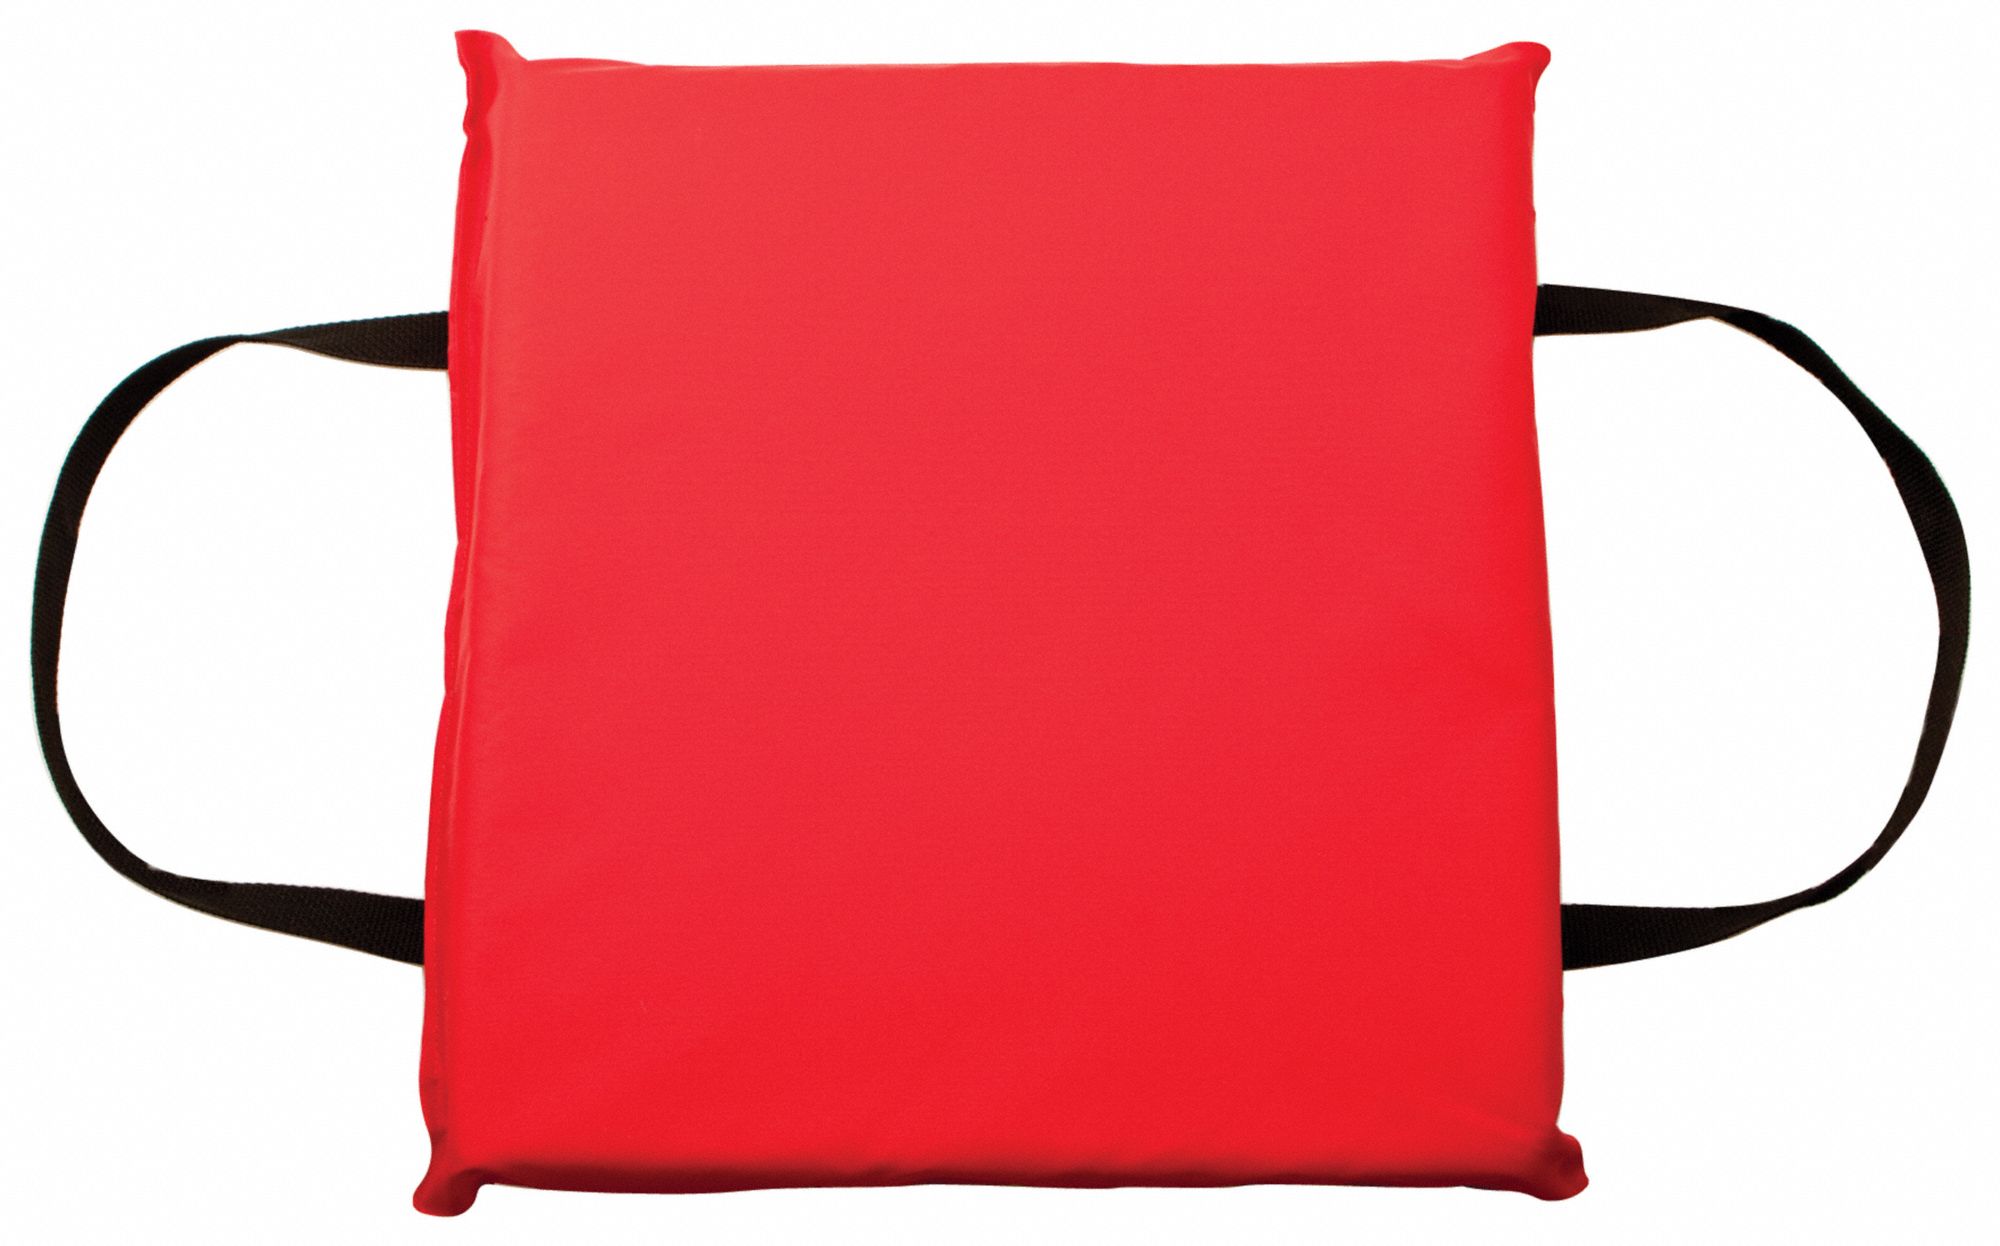 Throwable Foam Cushion: Polyester Fabric, USCG Approved, 15 in L x 16 in W x 2.5 in H